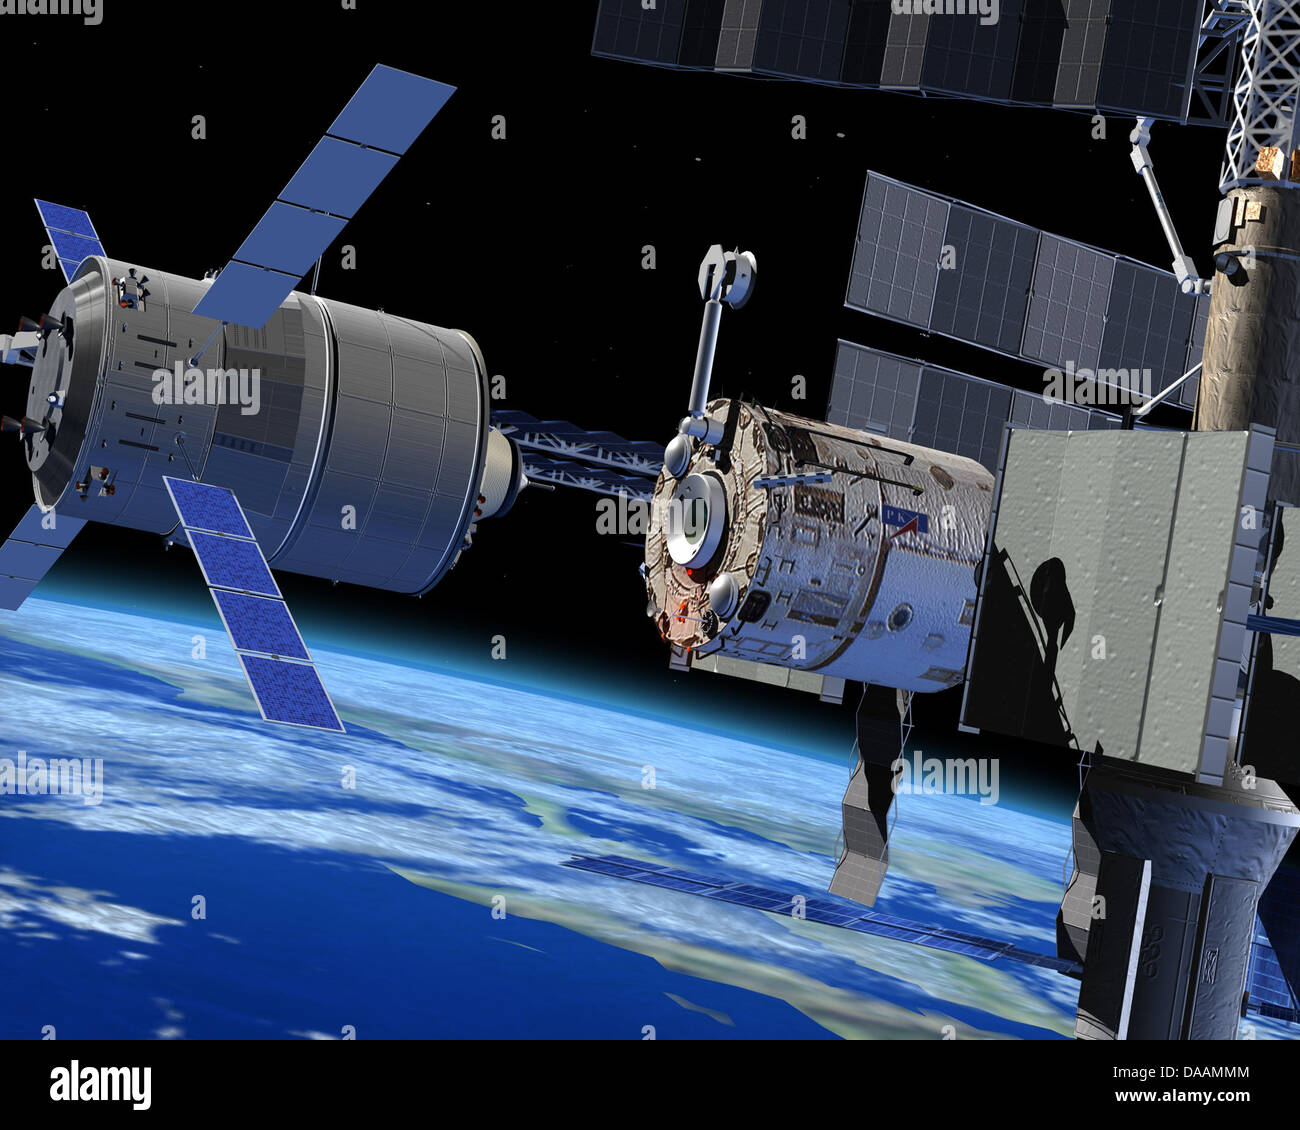 An undated computer-generated image of European unmanned cargo resupply spacecraft 'Johannes Kepler ATV-2' in the docking phase. On 15 February 2011, the craft will be launched on boardb an Ariane 5ES rocket to dock at International Space Station ISS eight days later. It is currently being prepared for launch at the Guiana Space Centre, French Guiana. Photo: EADS Astrium /  Silicon Stock Photo